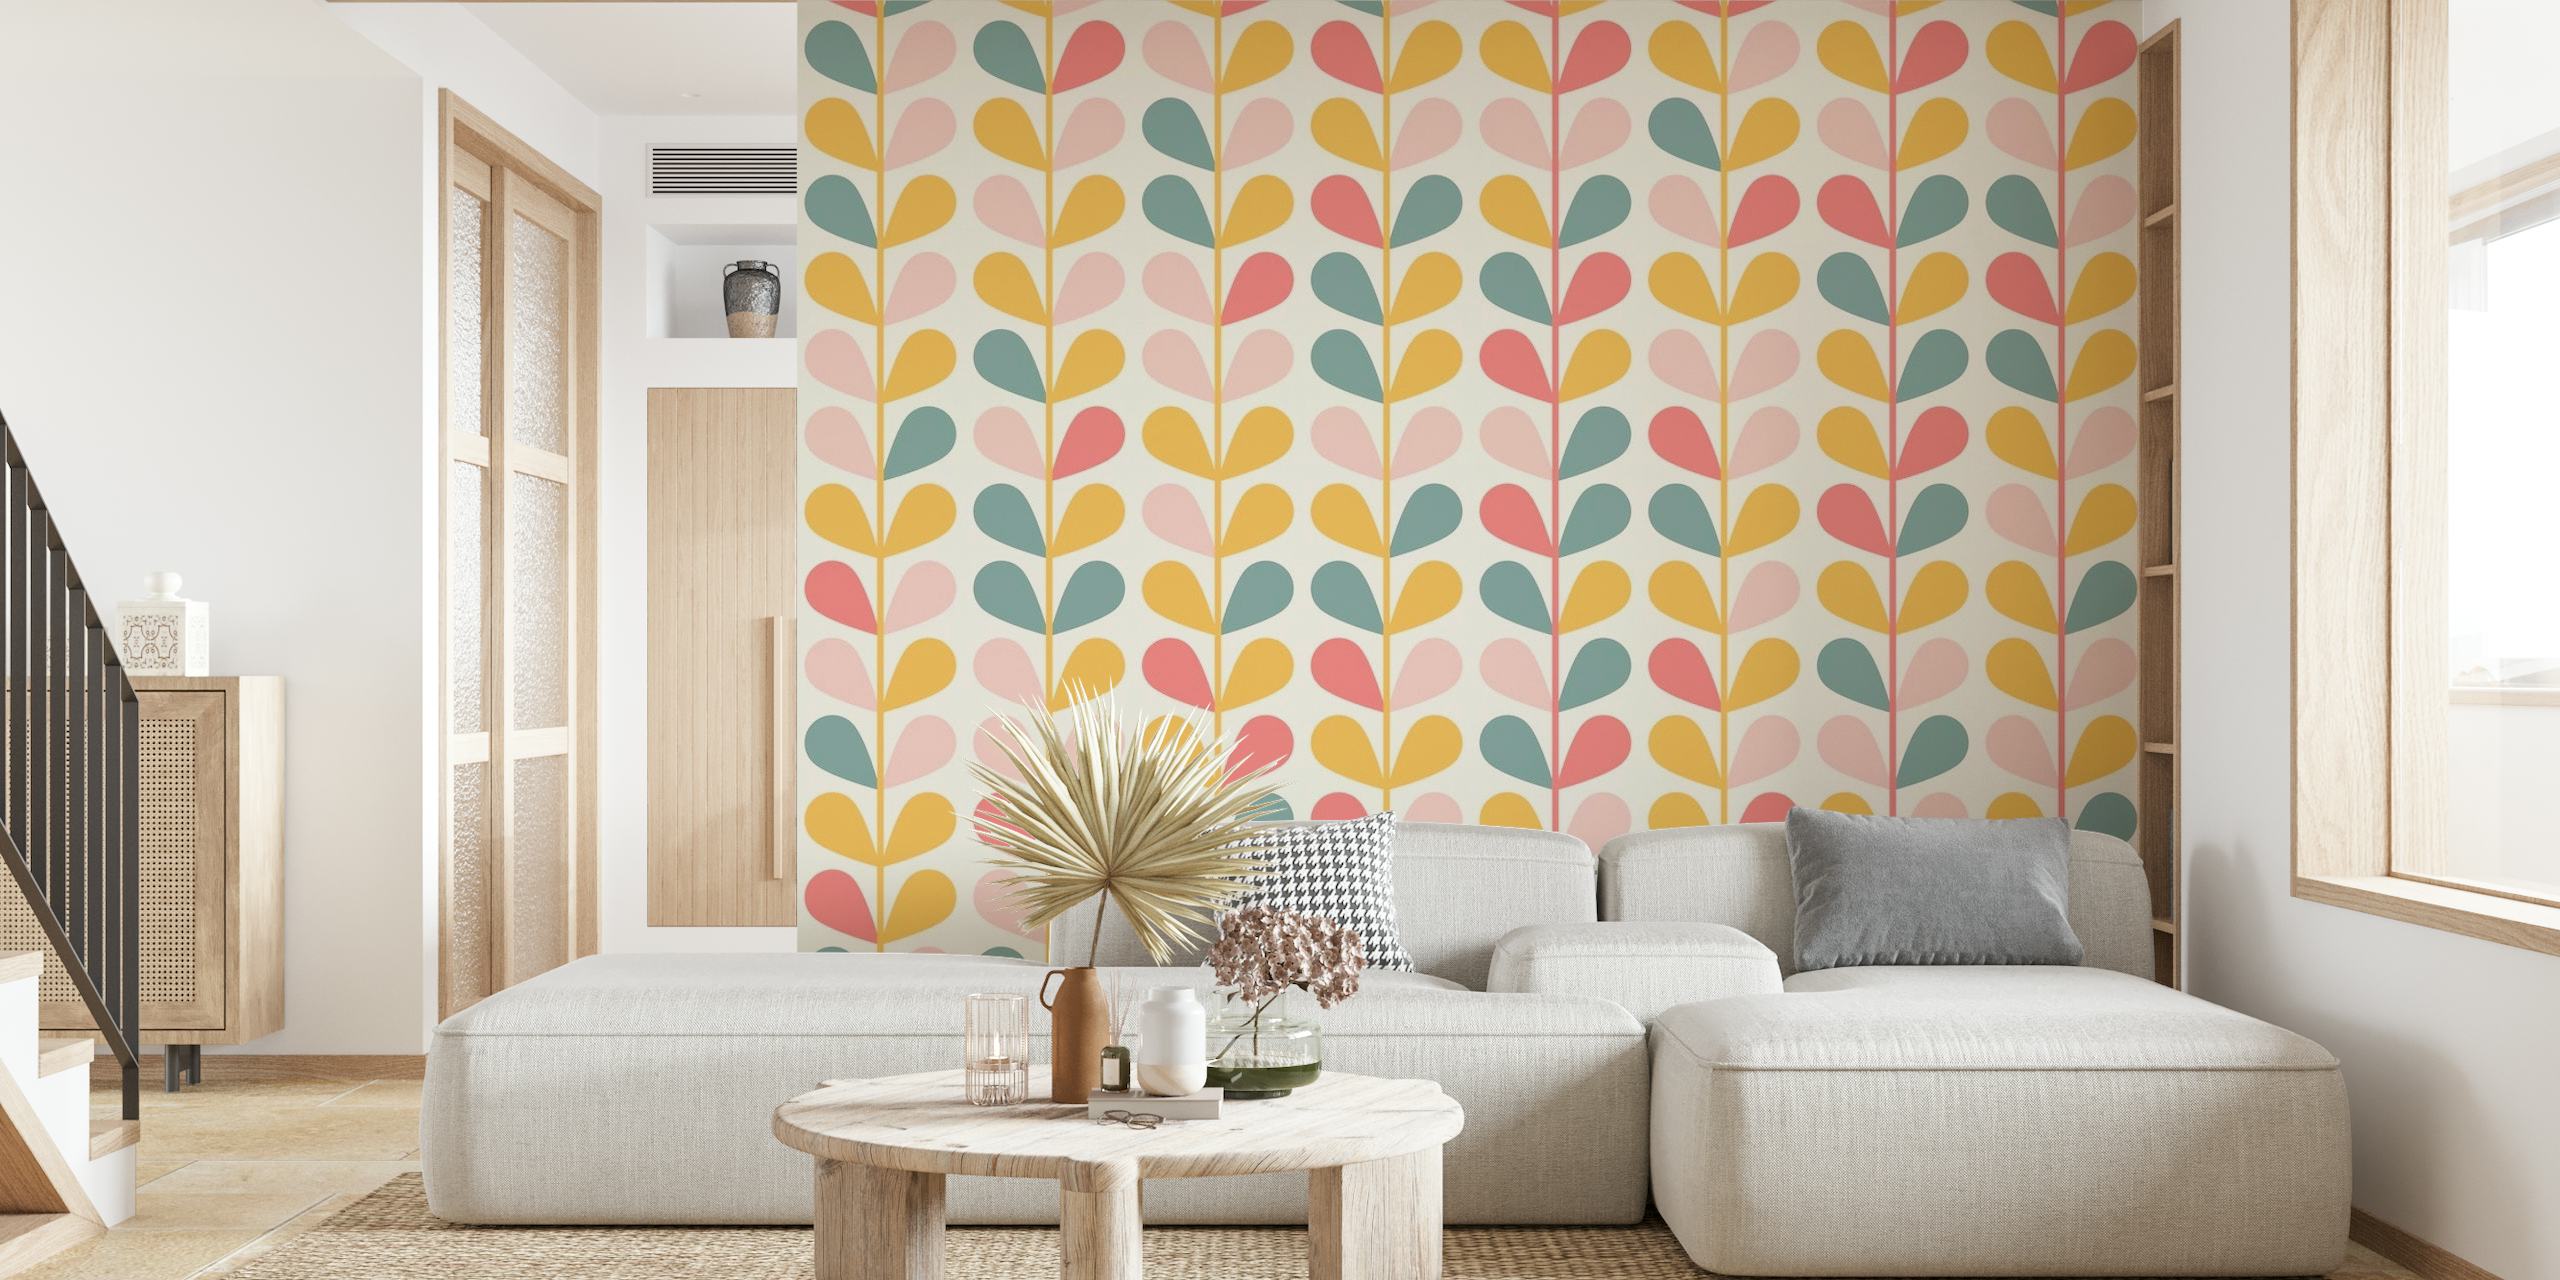 Vibrant mid-century leaf pattern wall mural with pink, green, yellow, and orange hues